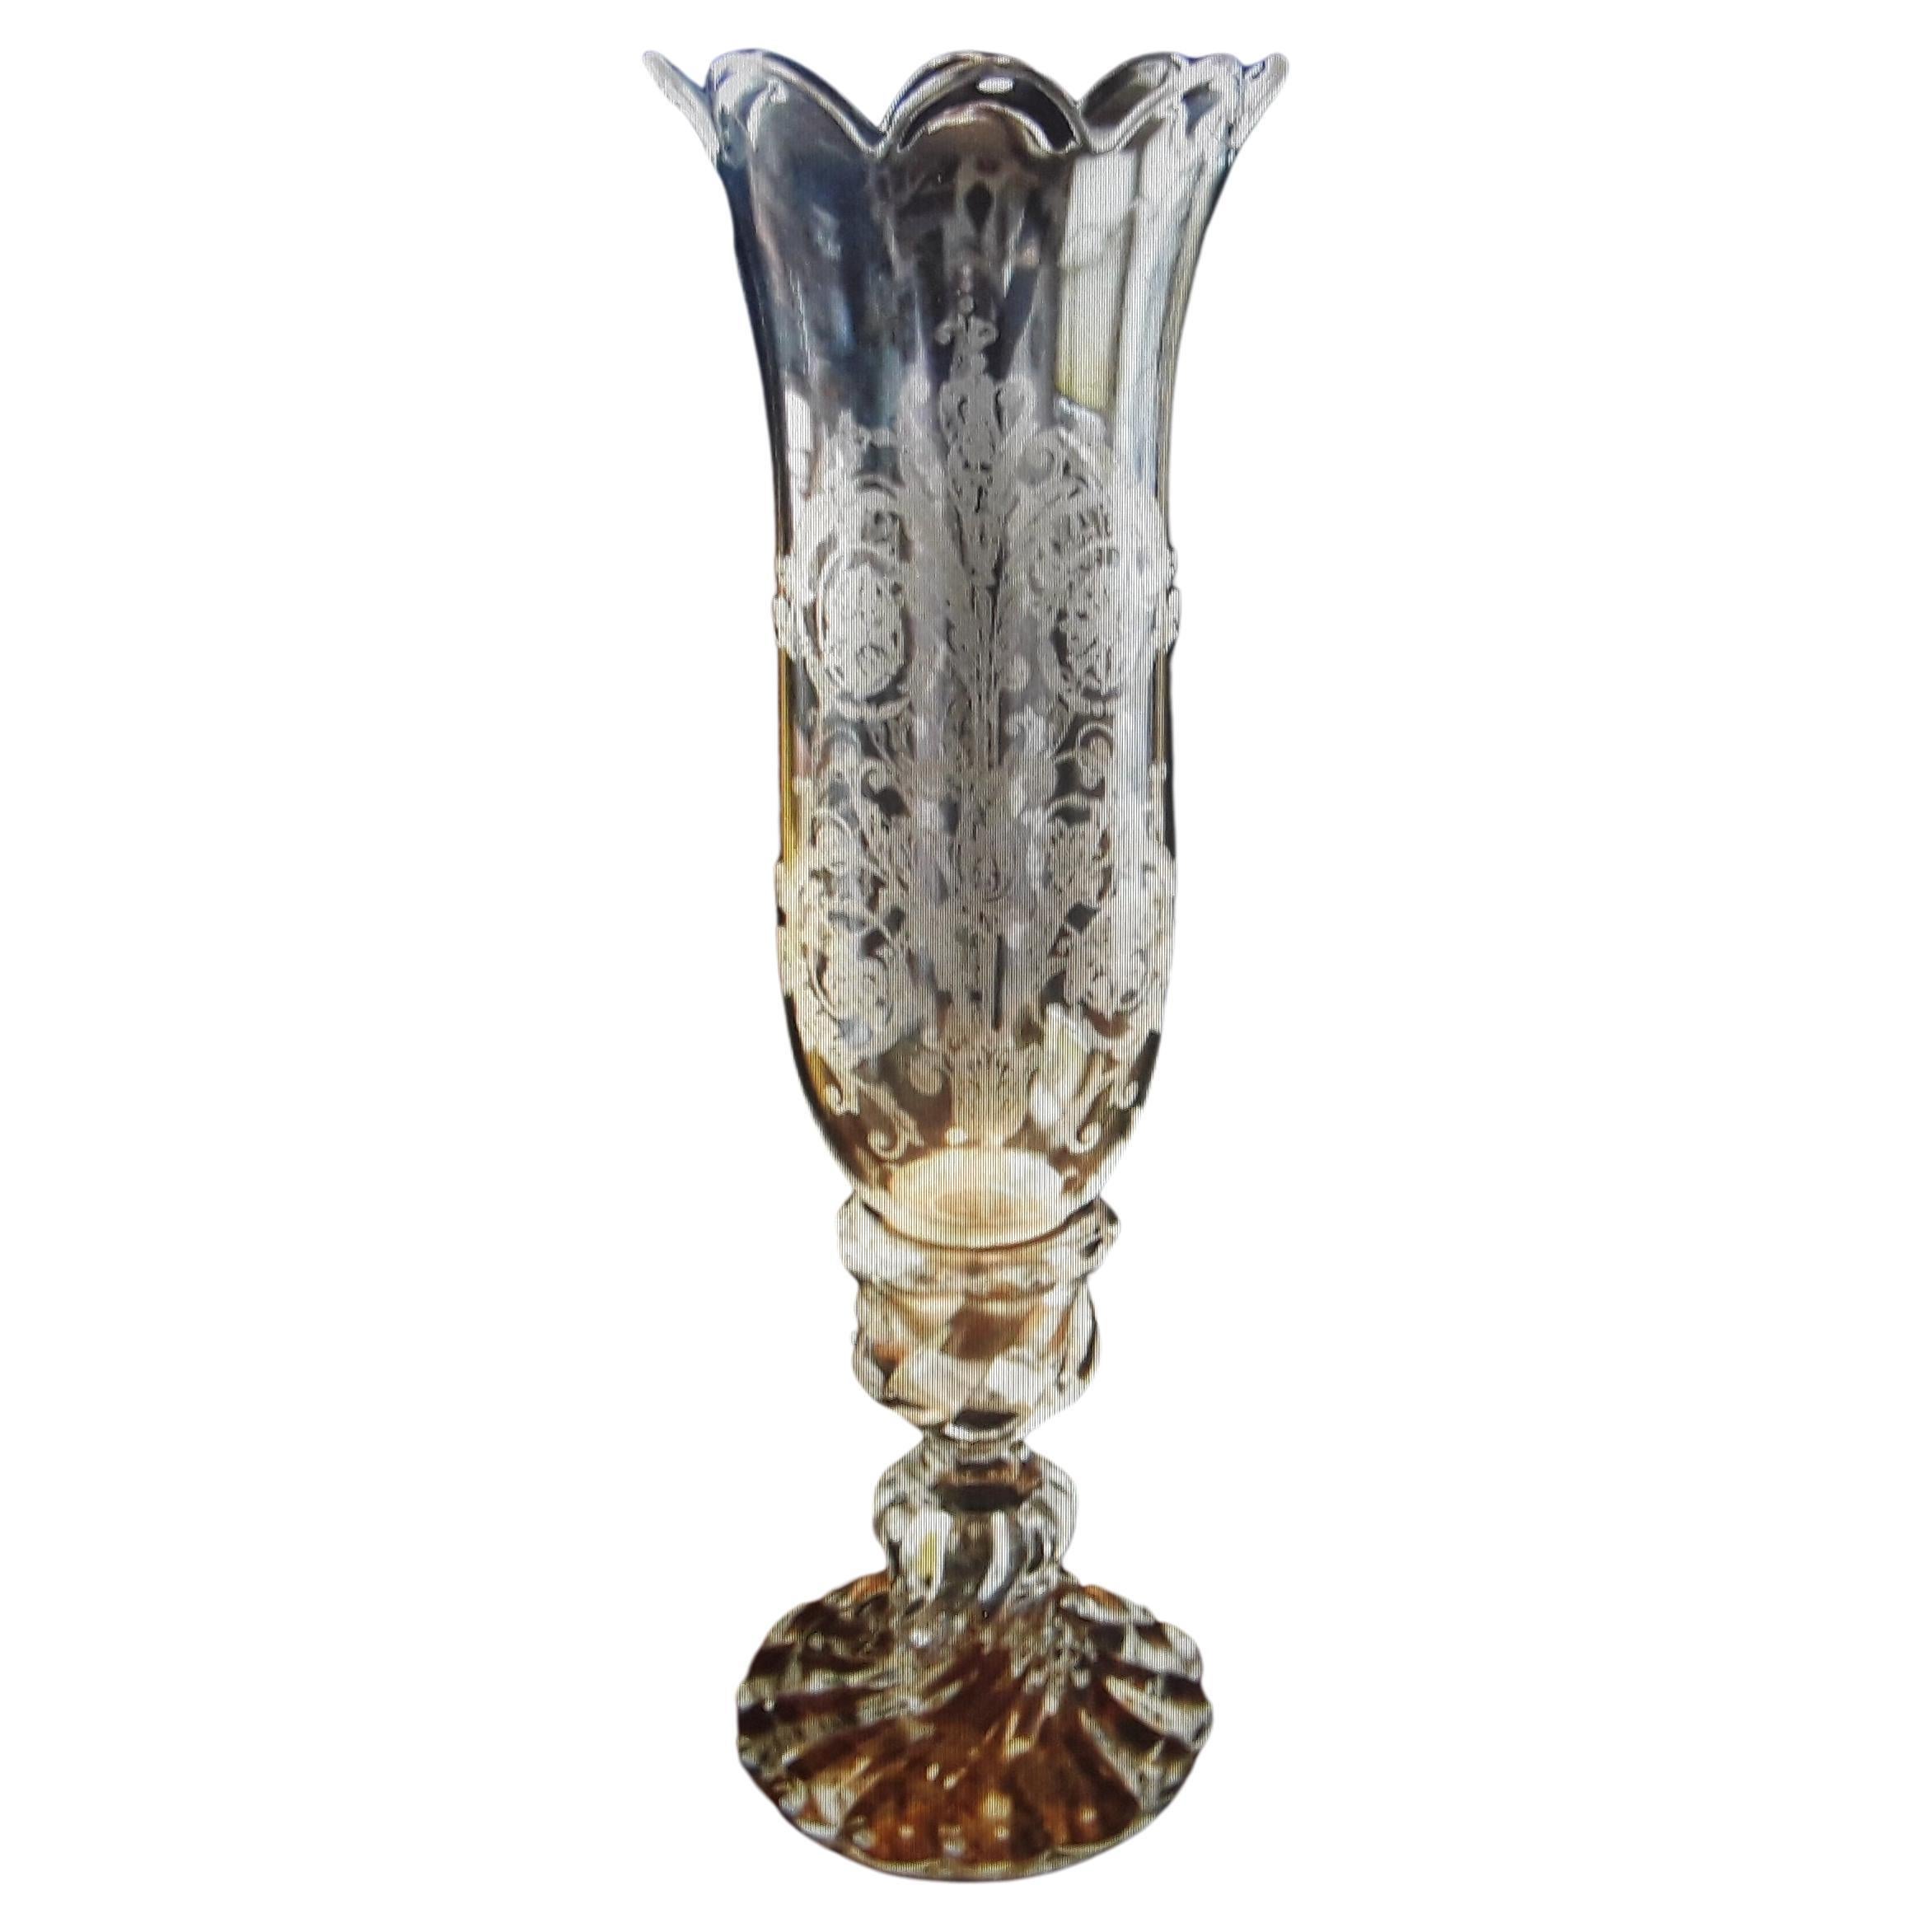 1940's French Hollywood Regency Signed Baccarat 2 Piece Candle Lamp "Swirl" For Sale